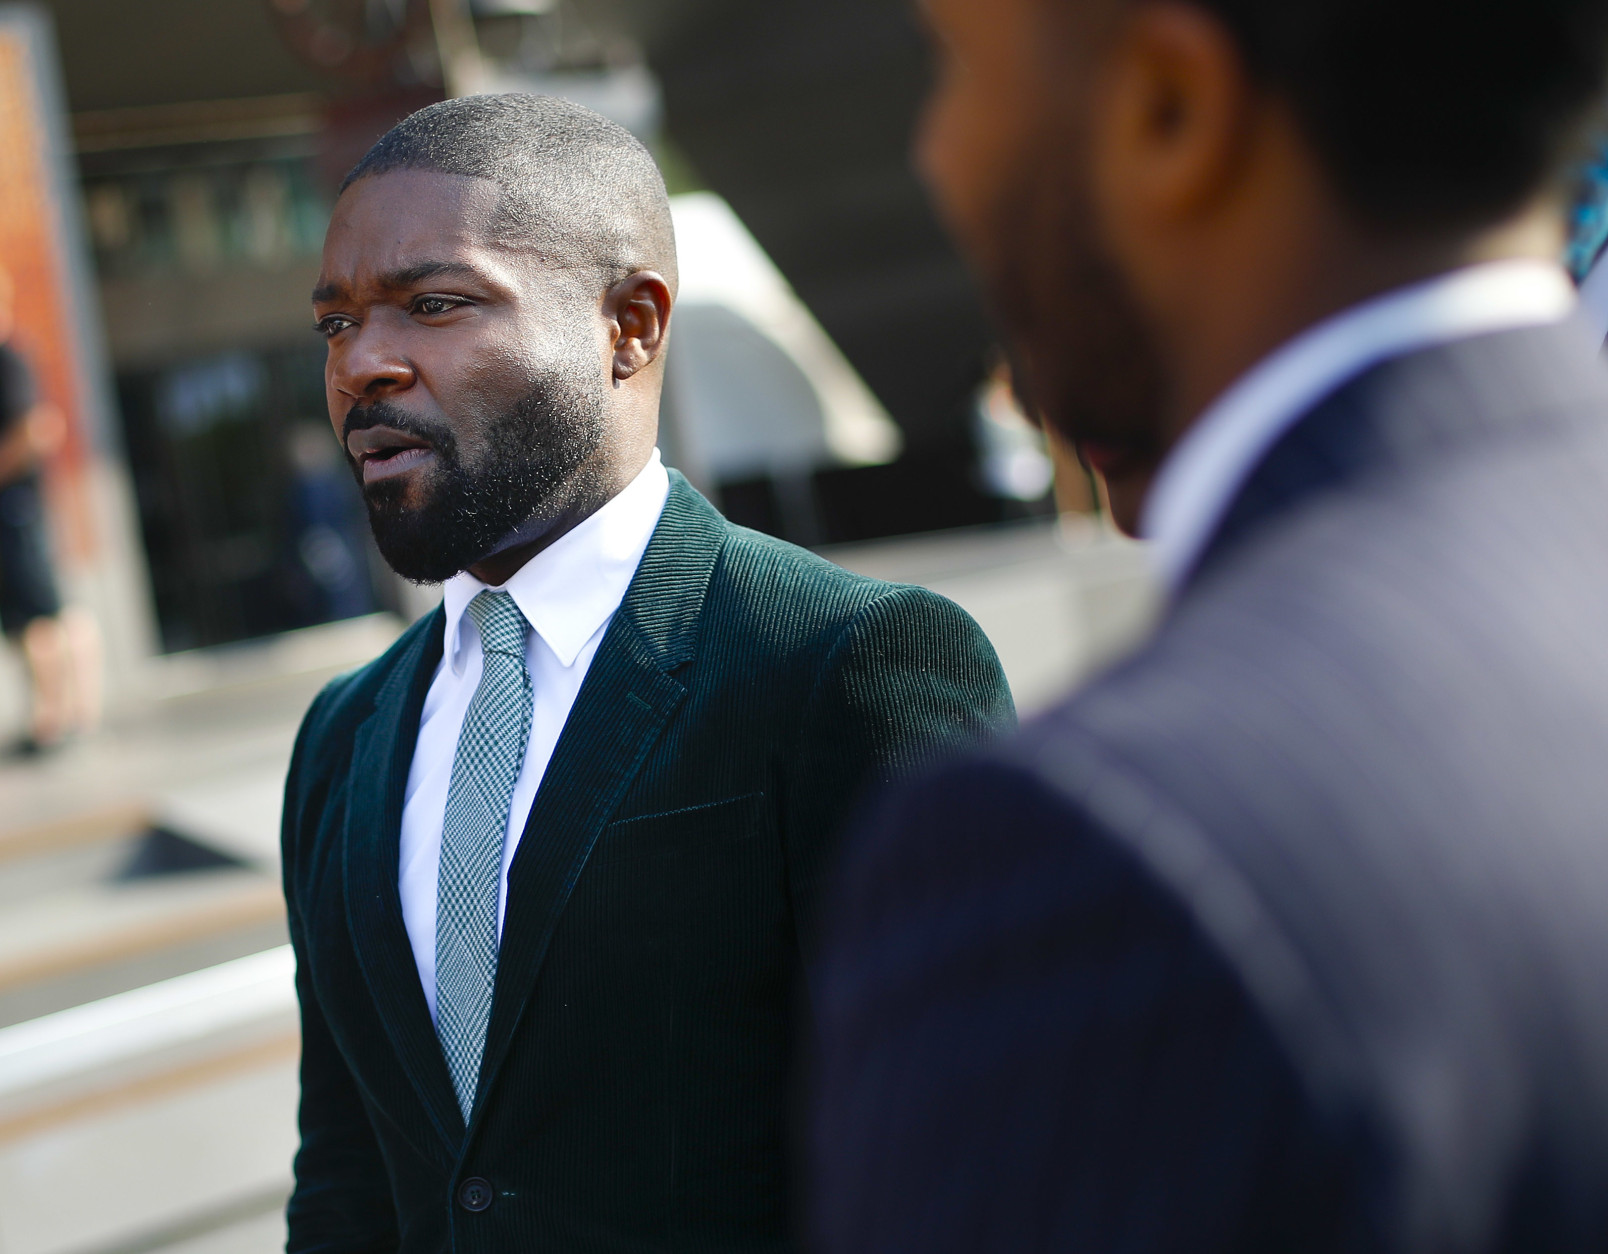 Actor David Oyelowo arrives for the dedication ceremony of the Smithsonian Museum of African American History and Culture on the National Mall in Washington, Saturday, Sept. 24, 2016. (AP Photo/Pablo Martinez Monsivais)